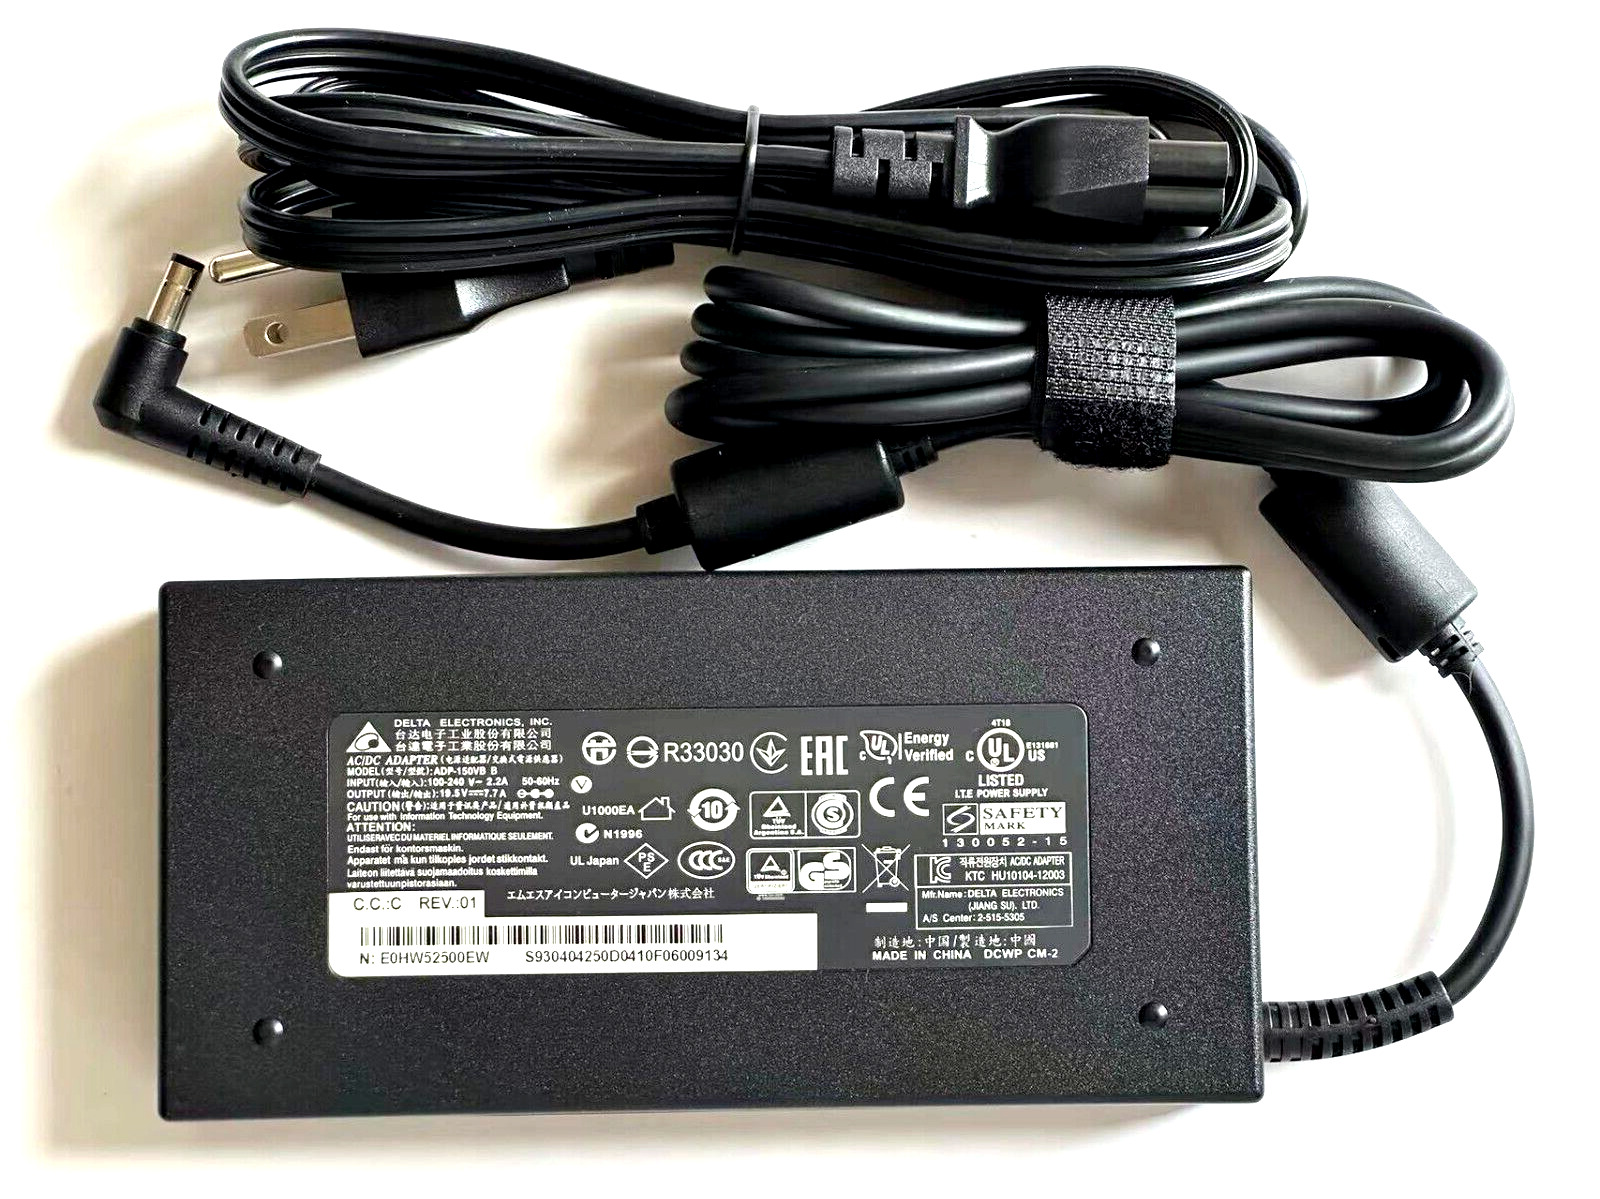 NEW Delta MSI Laptop Charger 150W 7.7A AC Adapter ADP-150VB B S93-0404250-D04 15